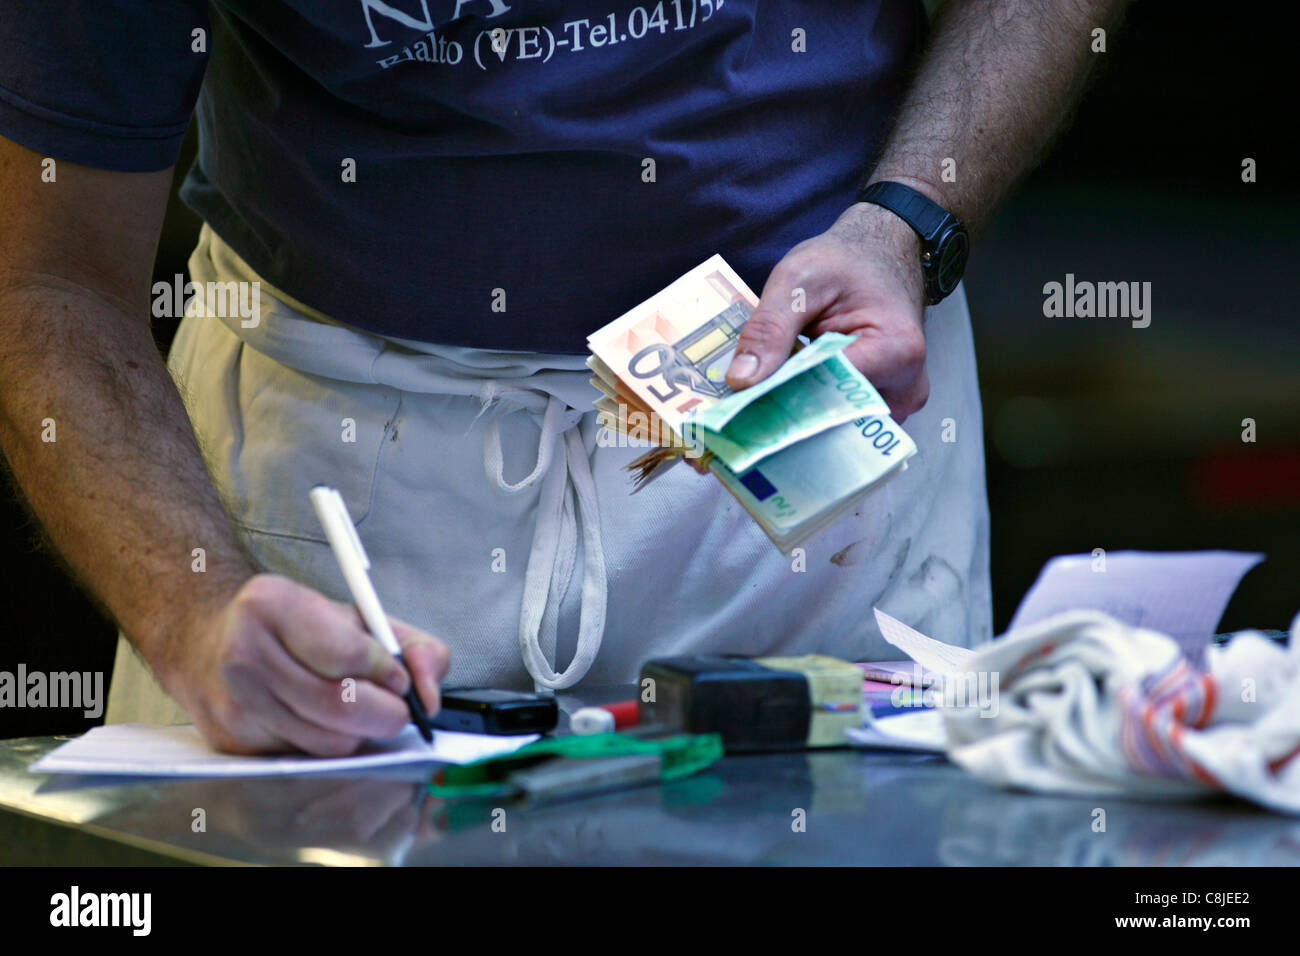 Man counting the days takings in euros to his ledger, Venice Italy Stock Photo